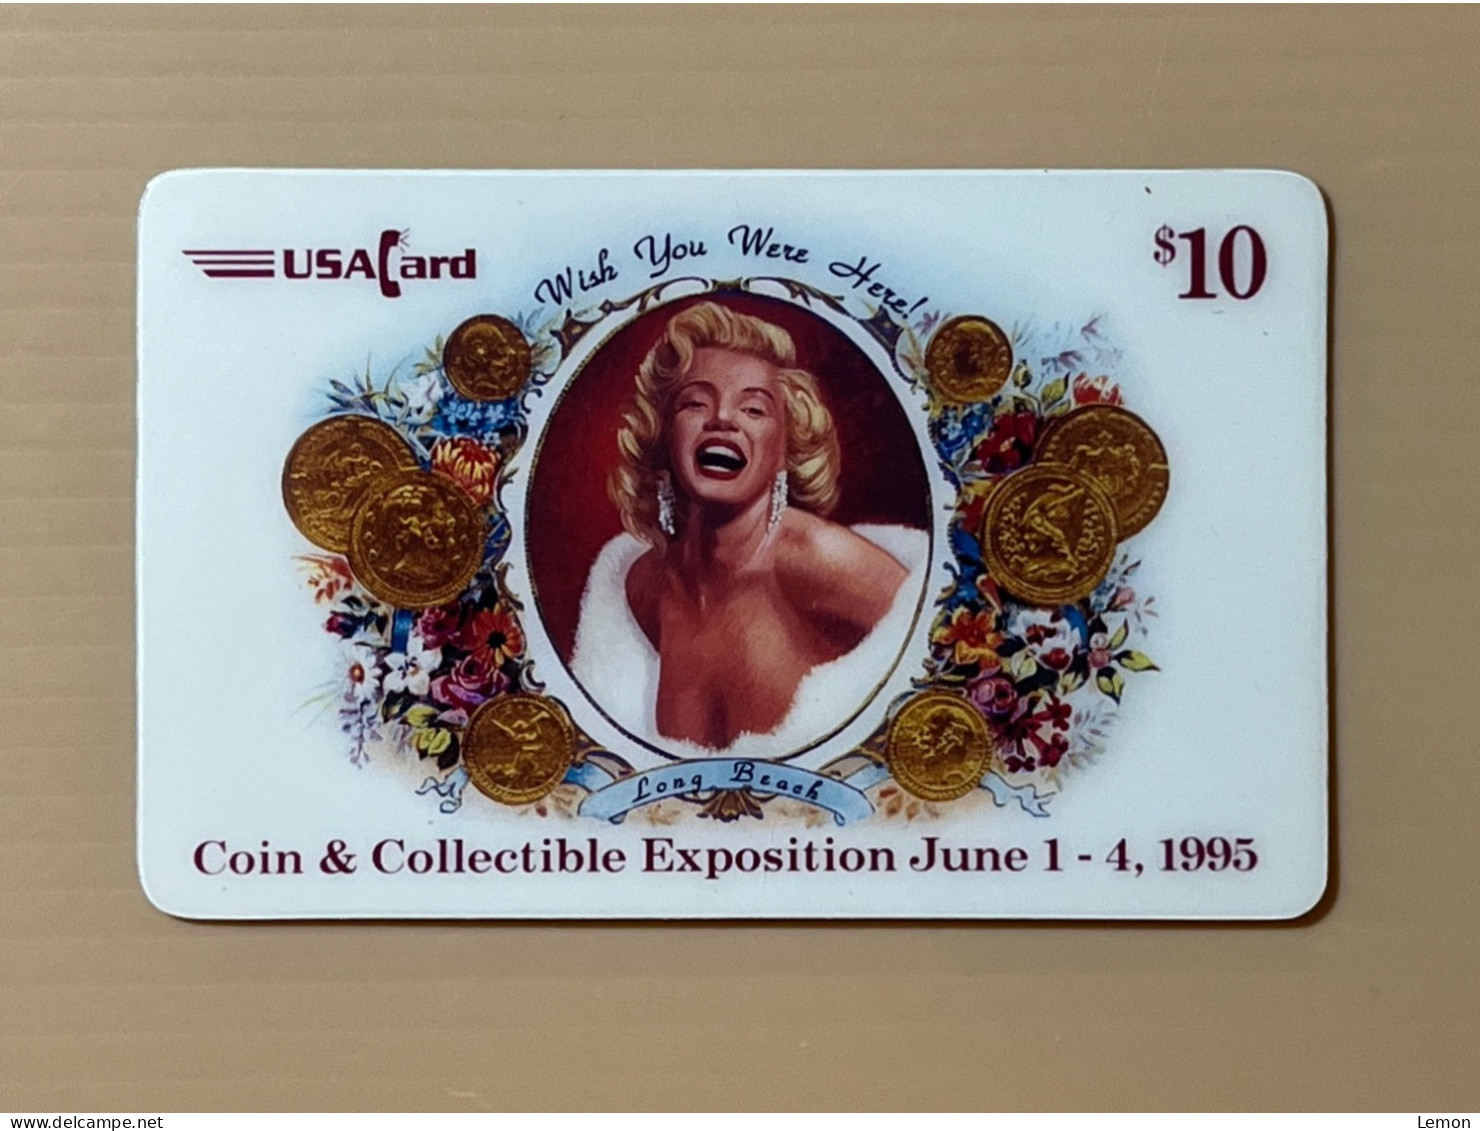 Mint USA UNITED STATES America Prepaid Telecard Phonecard, Coin & Collectible Expo 1995, Set Of 1 Mint Card With Folder - Sammlungen